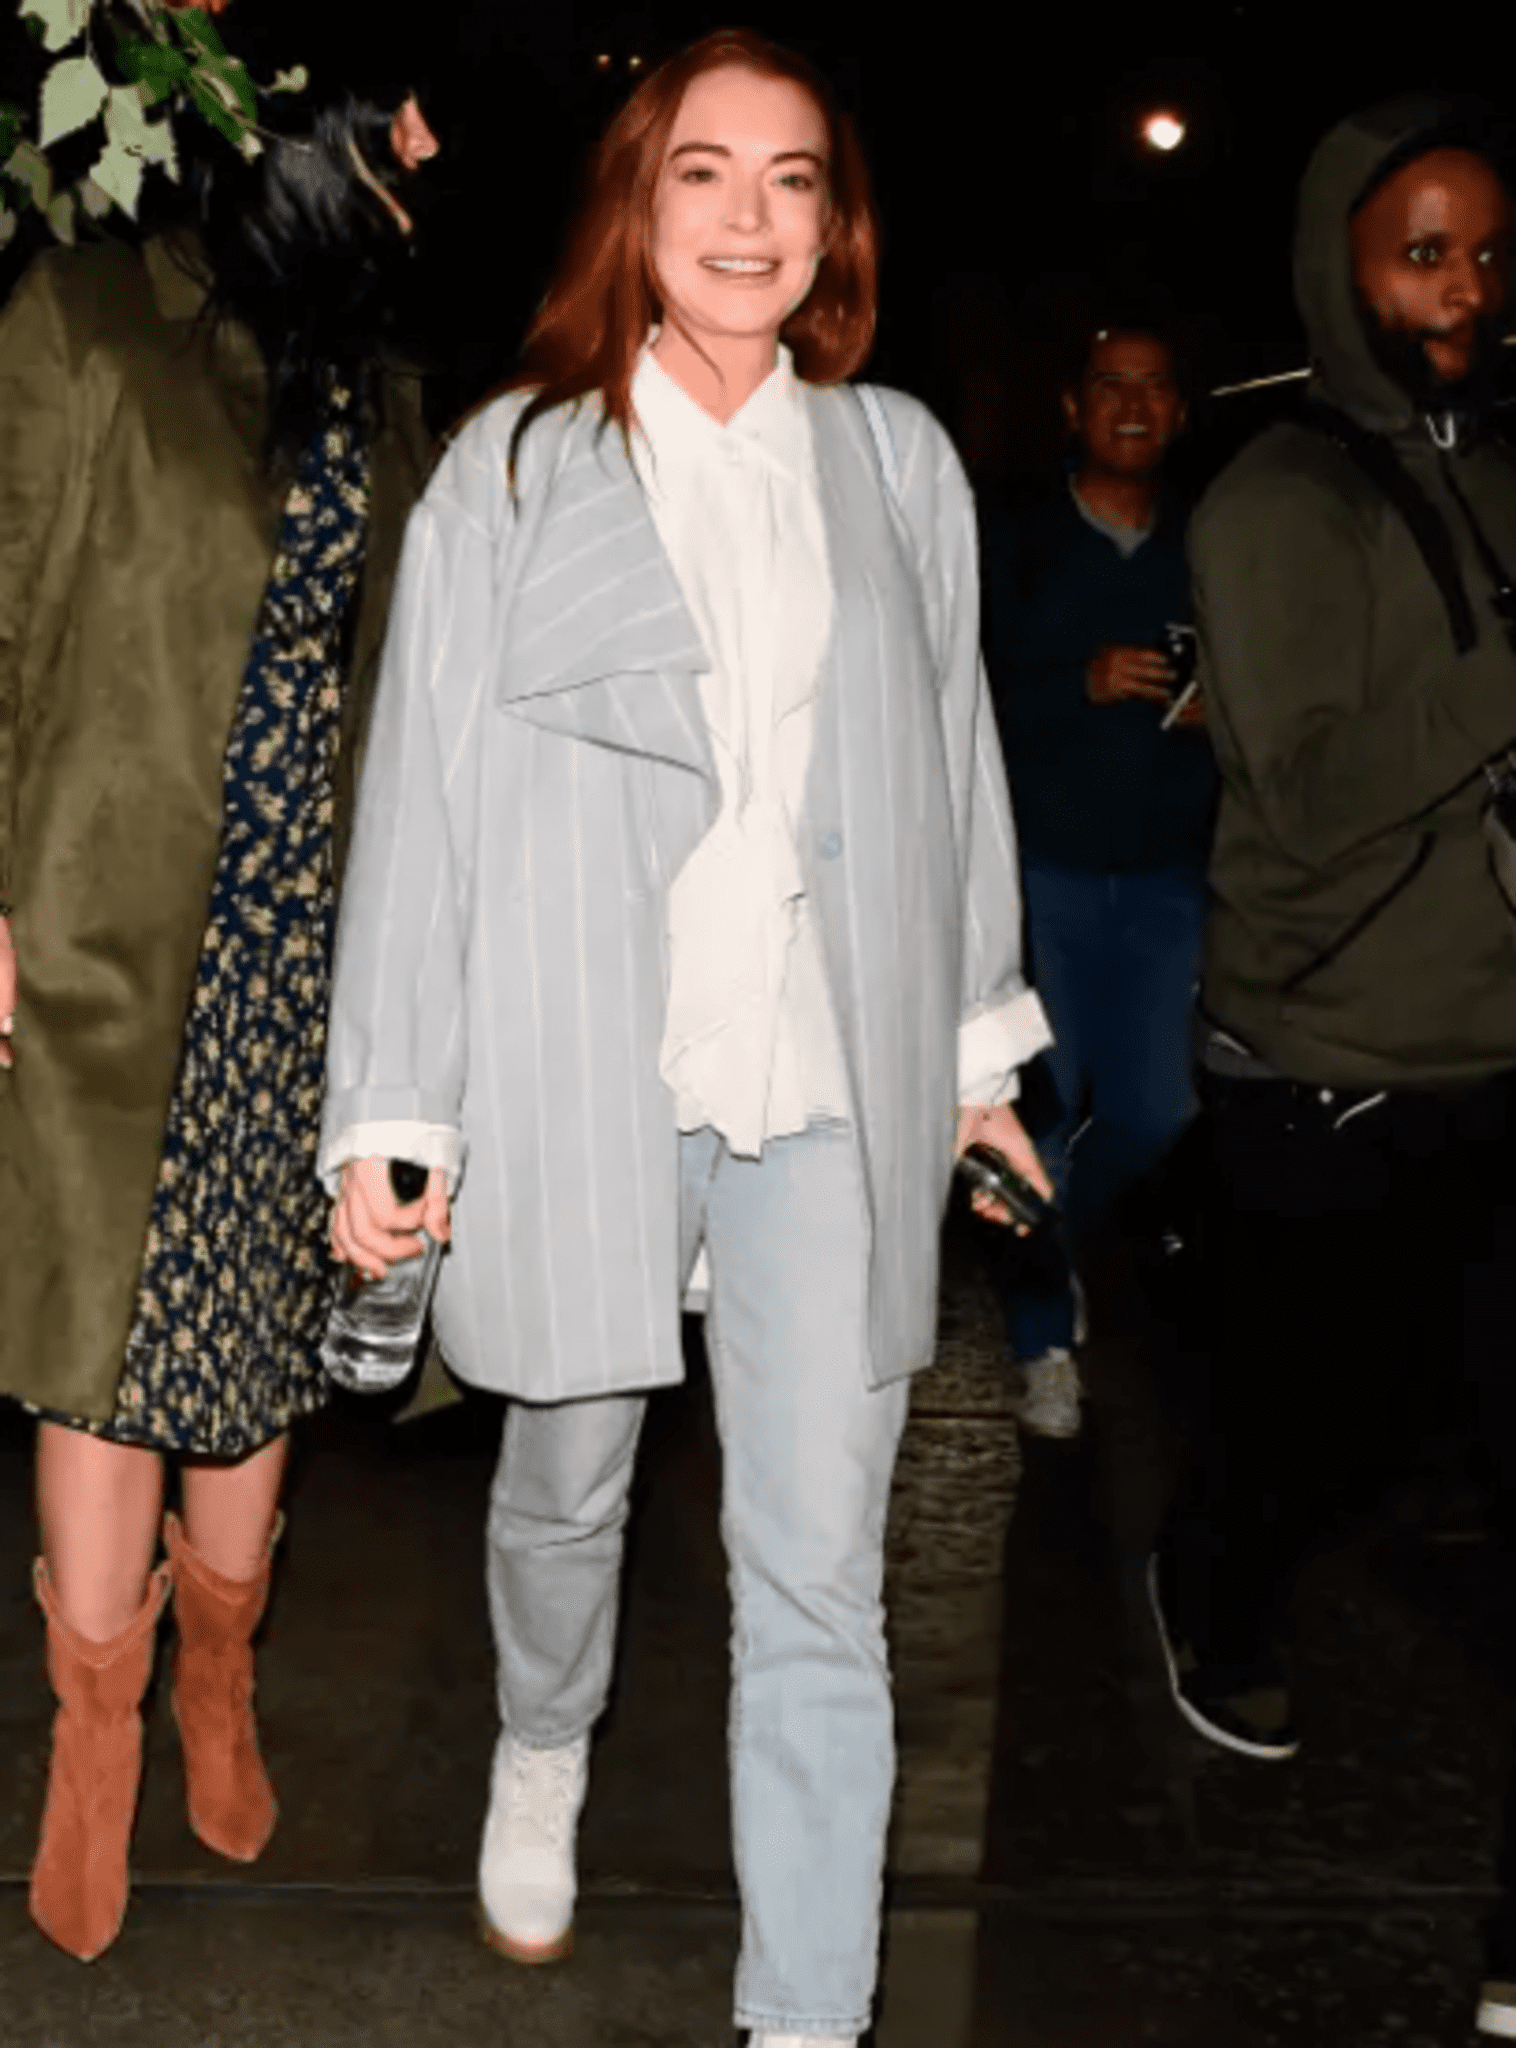 Lindsay Lohan Showed Up To Mark Ronson's Hotel Opening Performance As A Special Guest